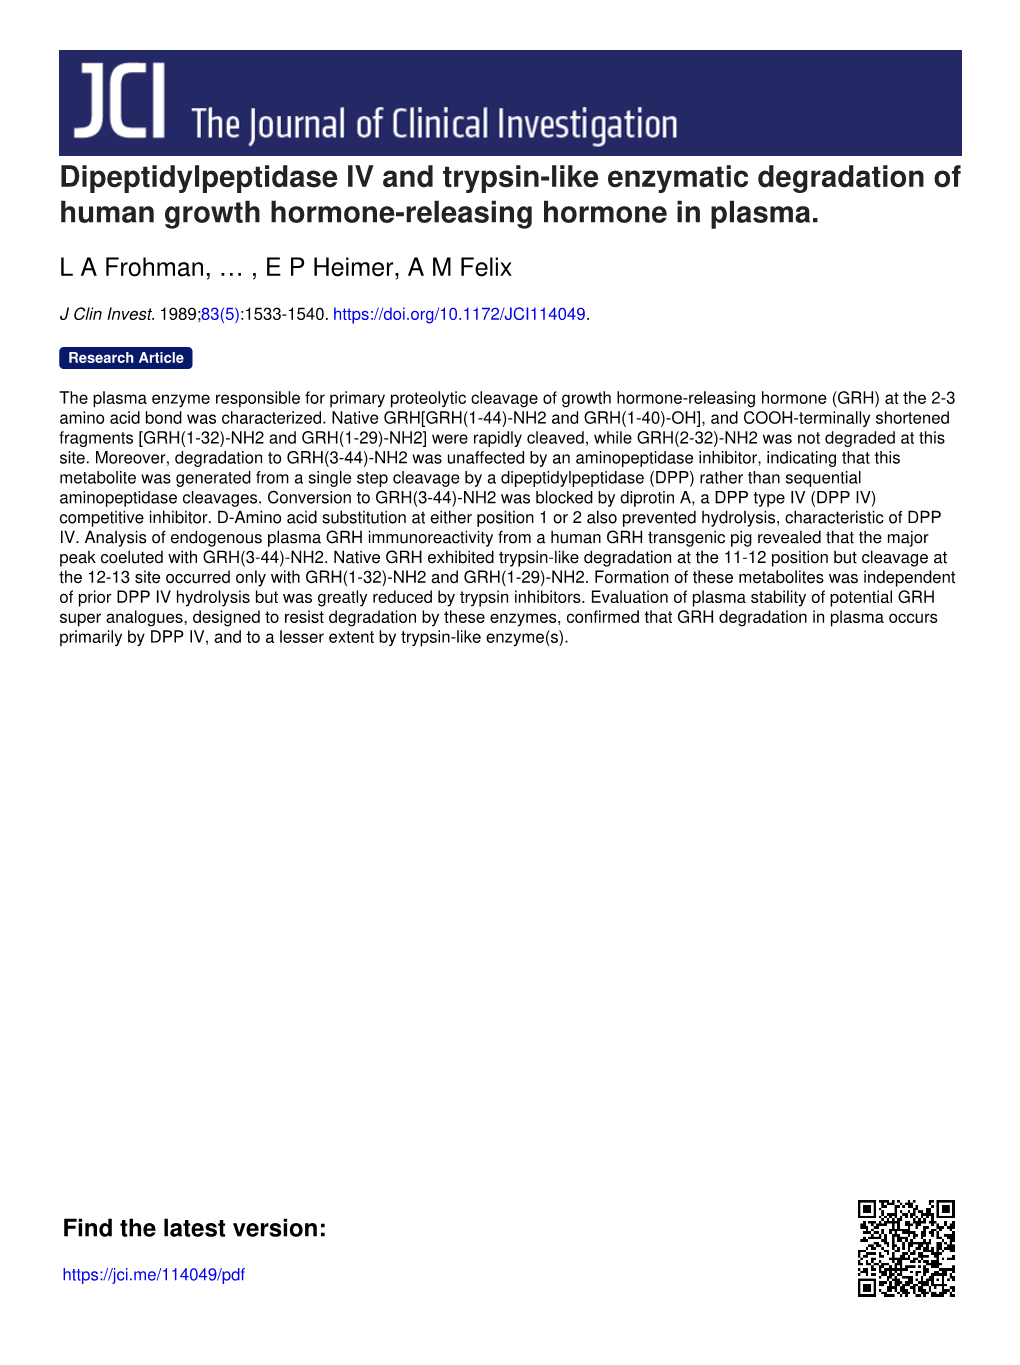 Dipeptidylpeptidase IV and Trypsin-Like Enzymatic Degradation of Human Growth Hormone-Releasing Hormone in Plasma